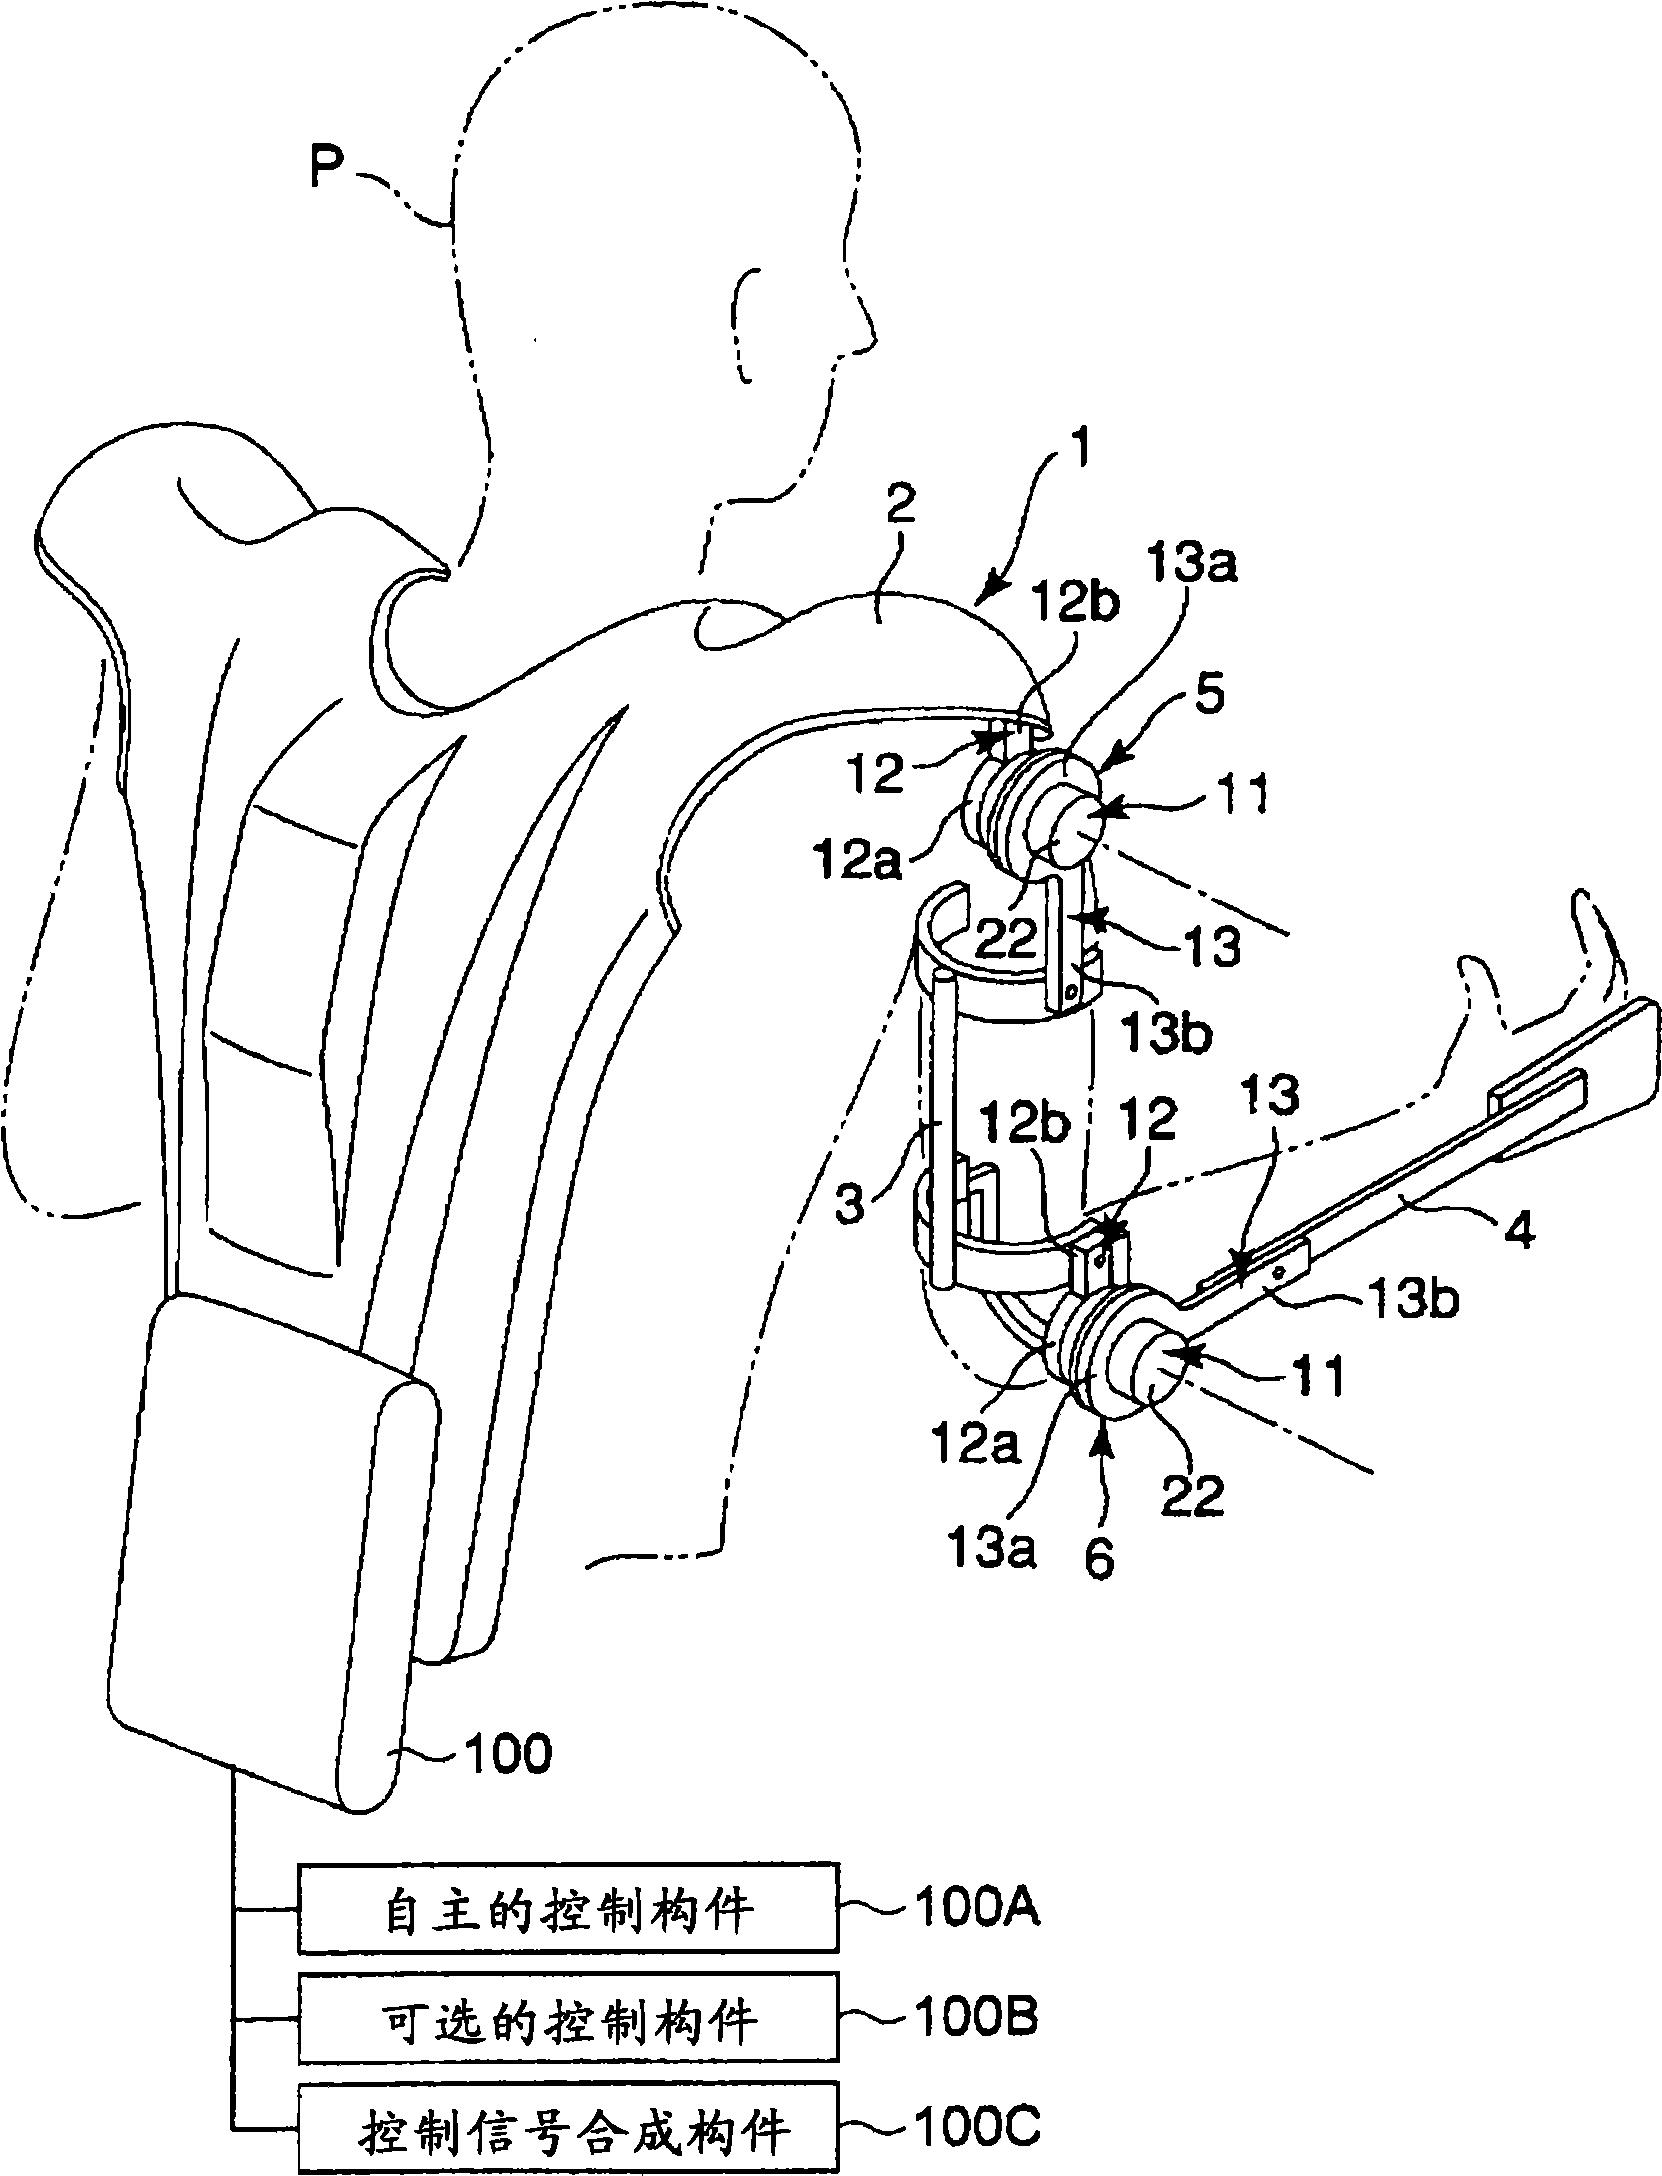 Motion assisting device and motion assisting device maintenance/management system